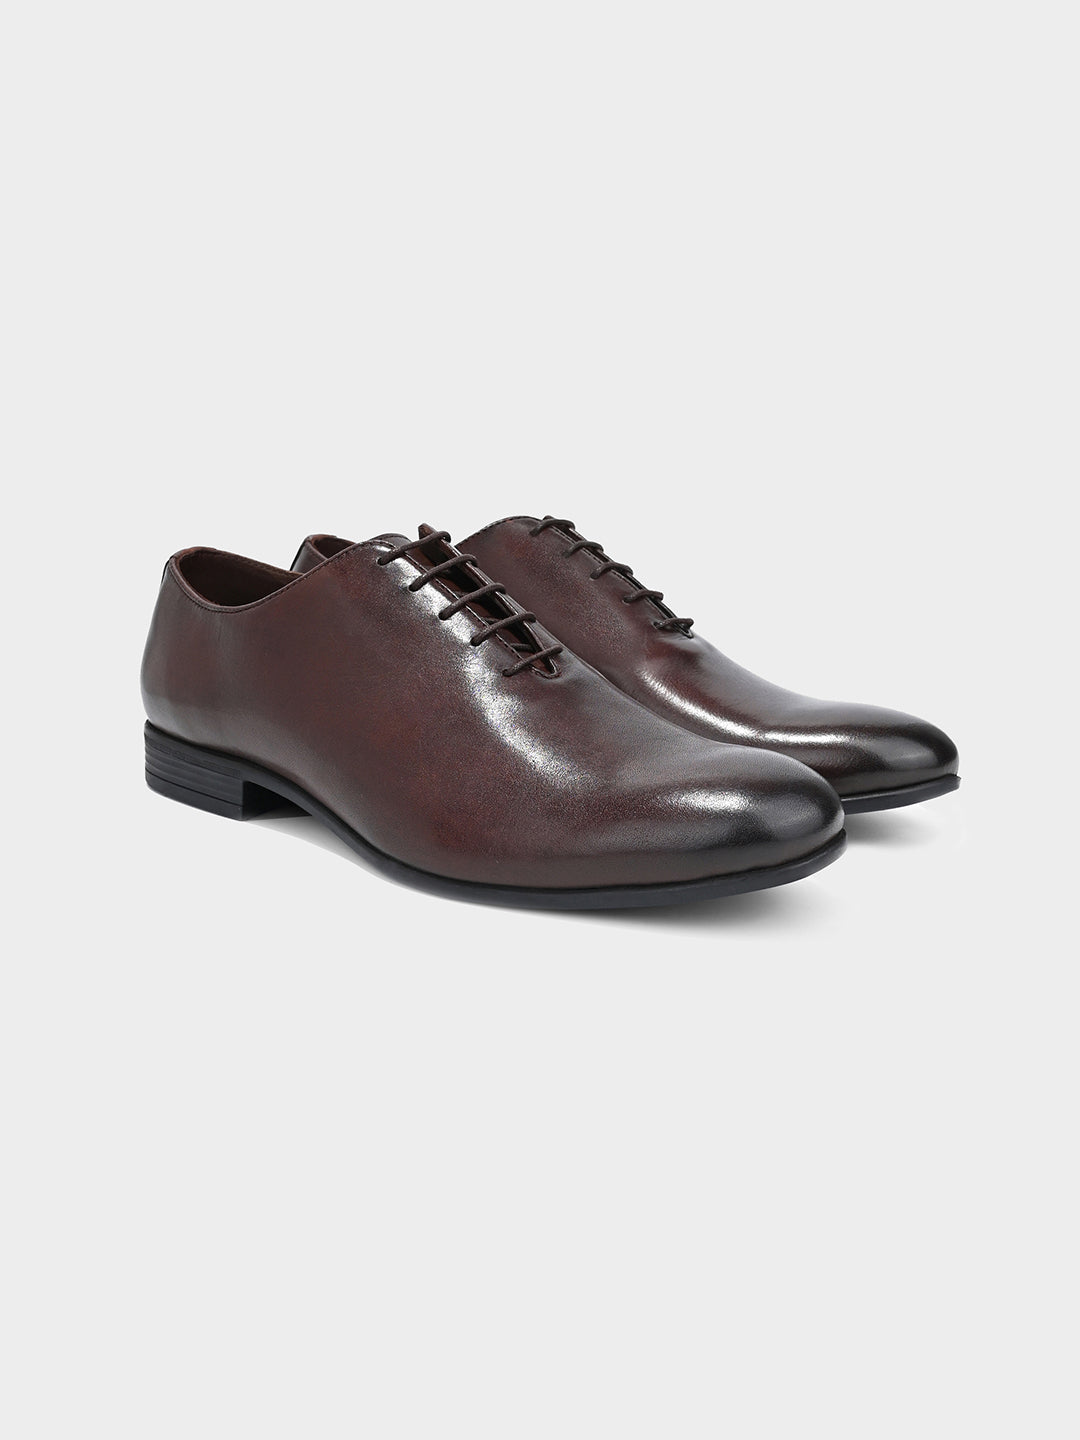 Men's Brown Leather Lace-Up Oxford Shoes